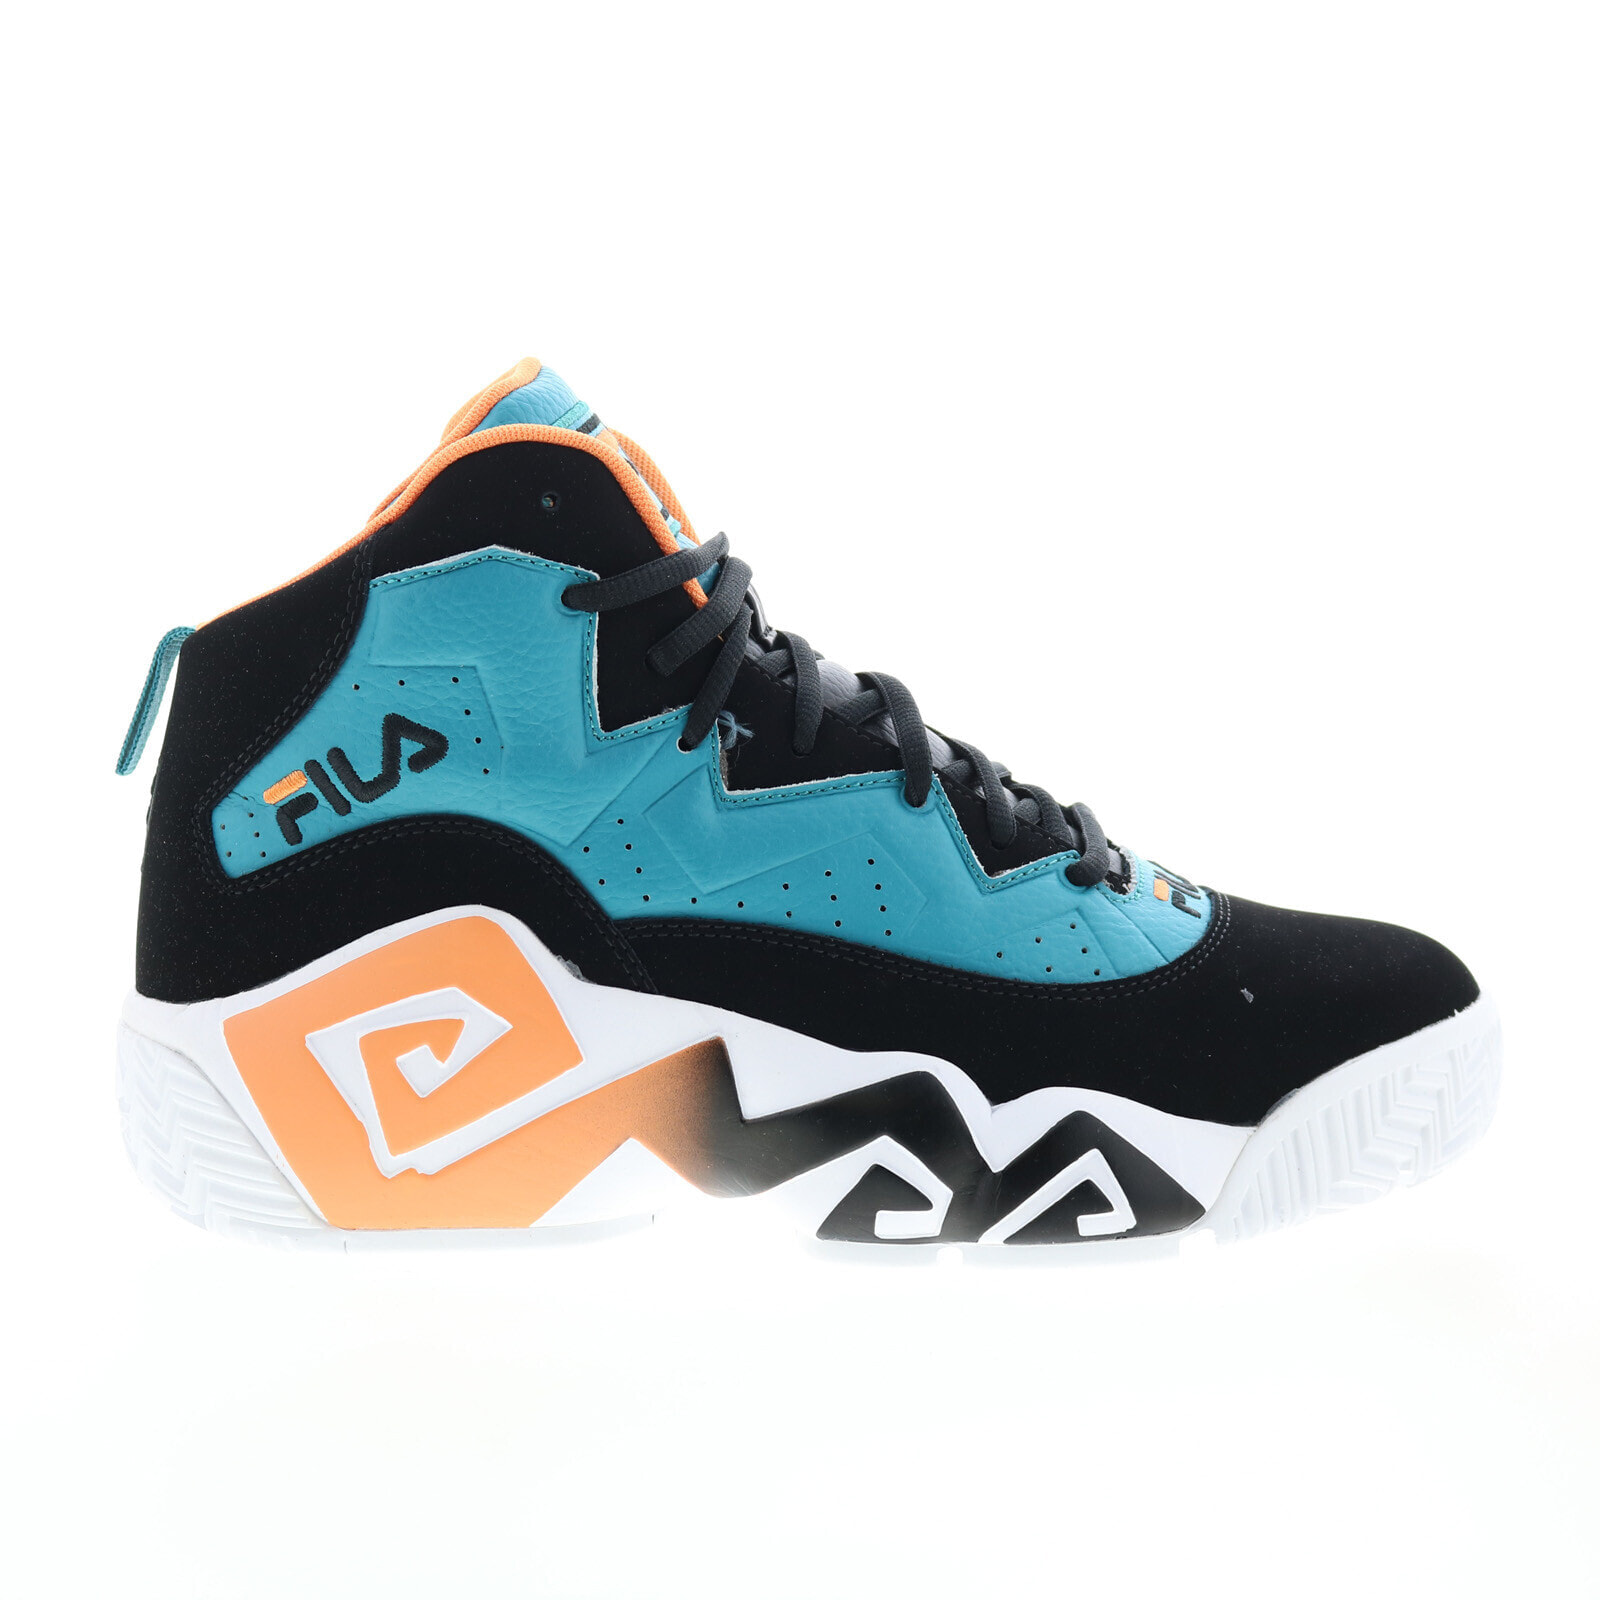 Fila MB 1BM01880-403 Mens Black Leather Lace Up Athletic Basketball Shoes